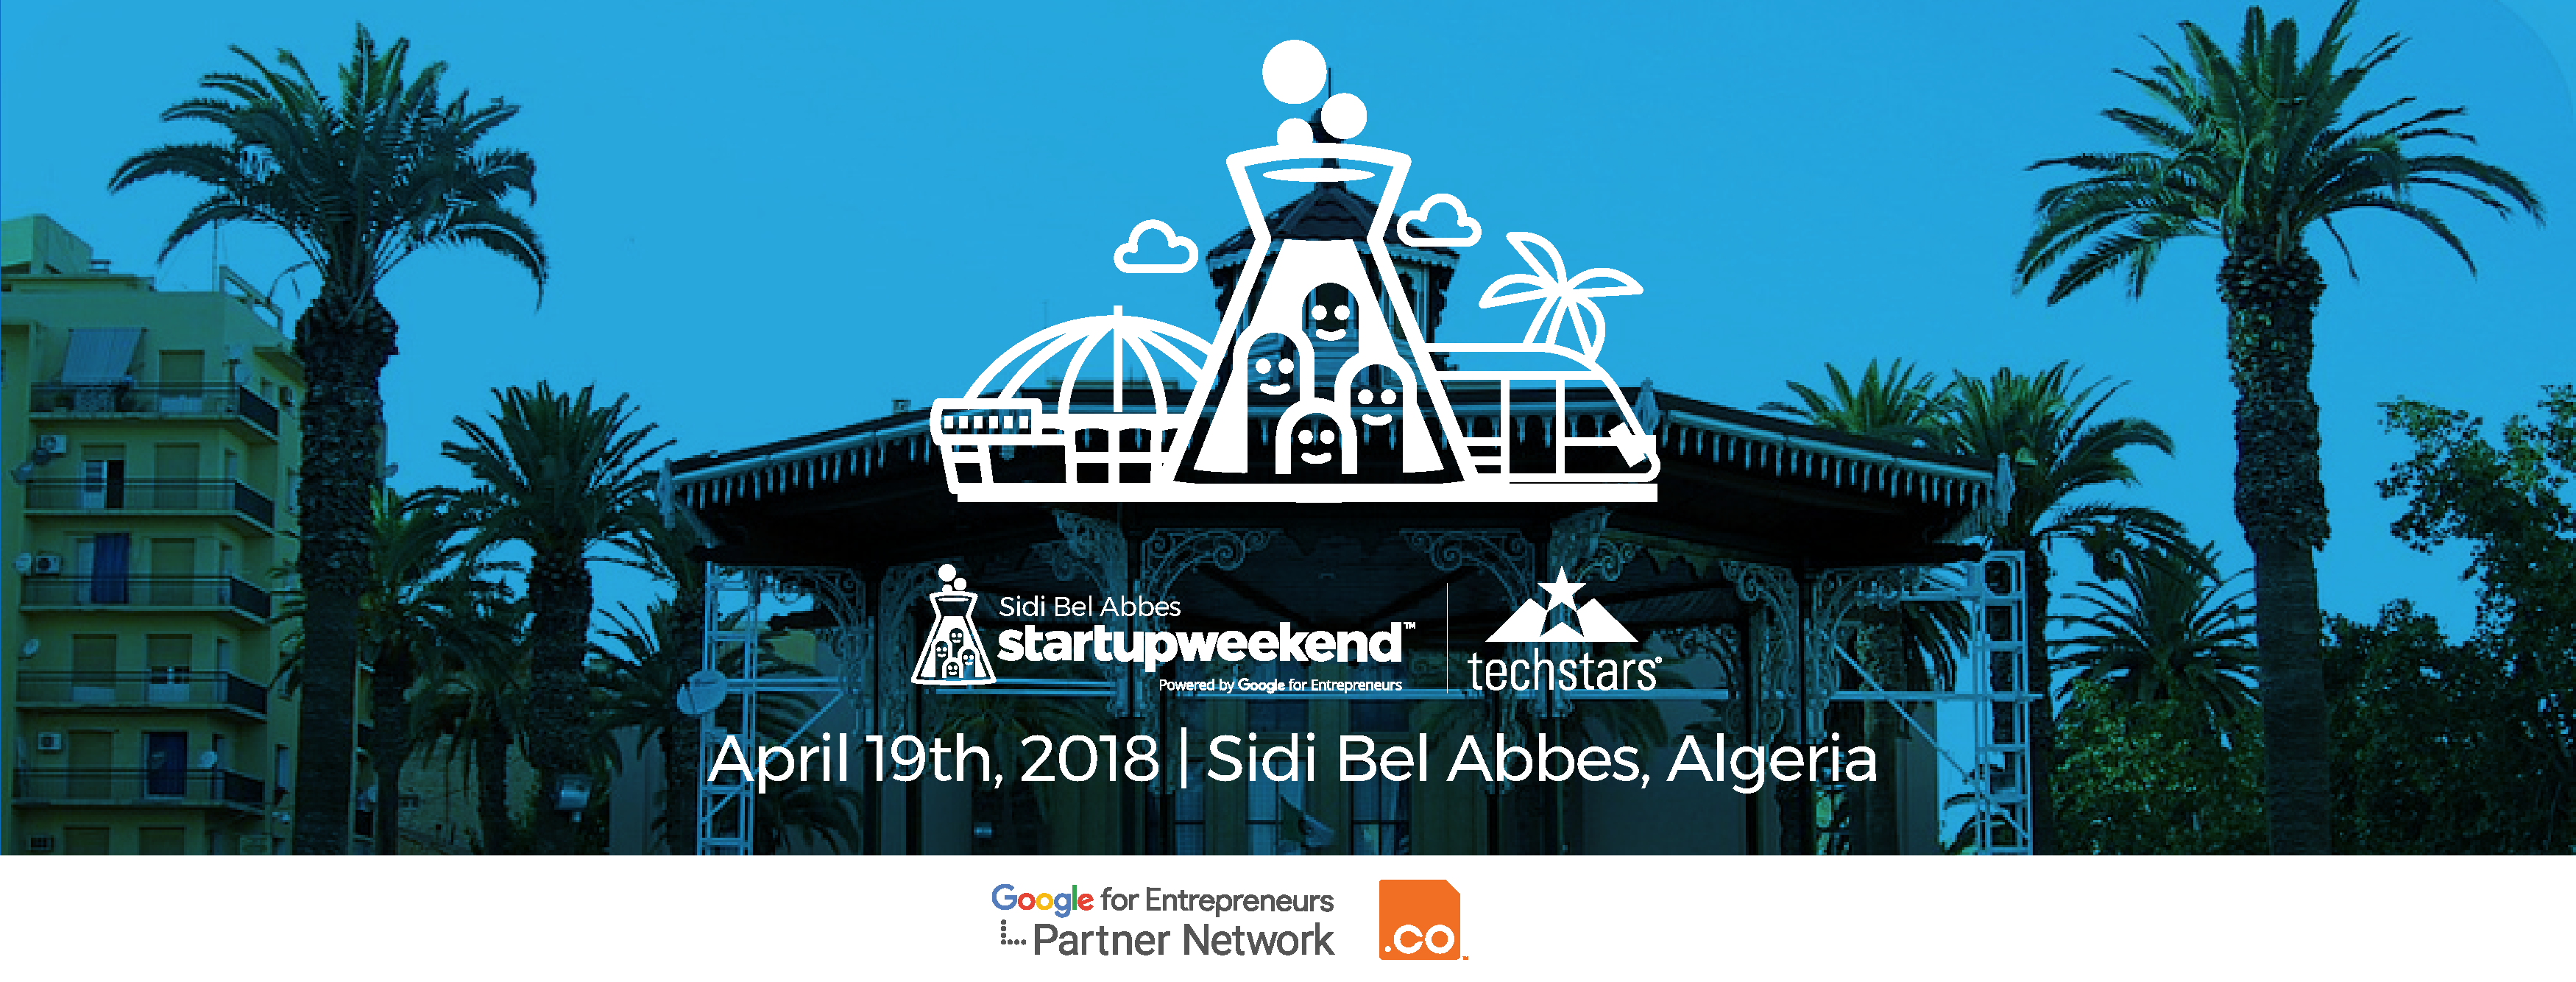 Startup Weekend Sidi Bel Abbes First Edition